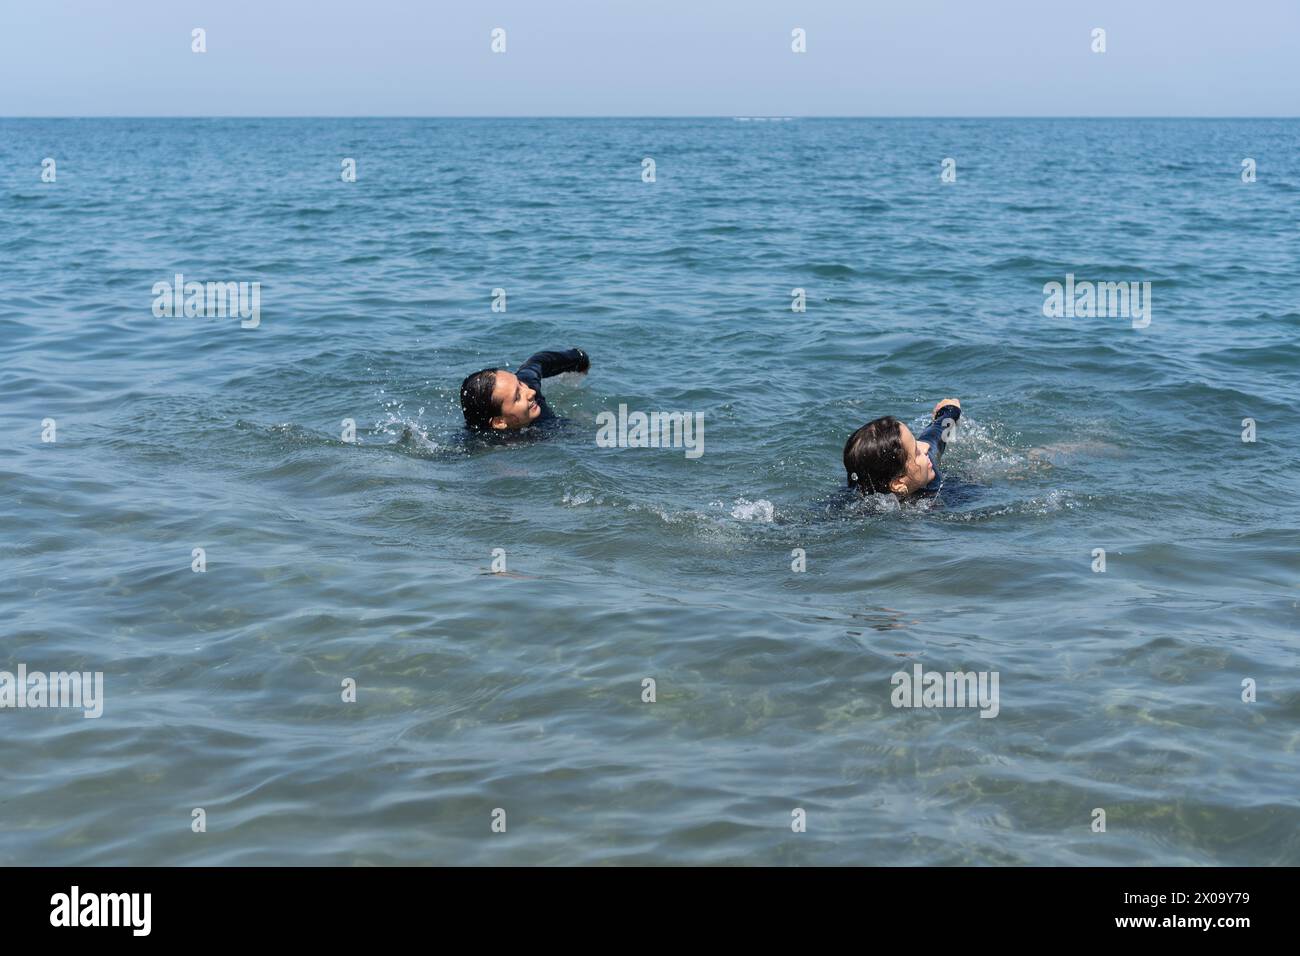 Two individuals swimming in calm ocean waters. Stock Photo